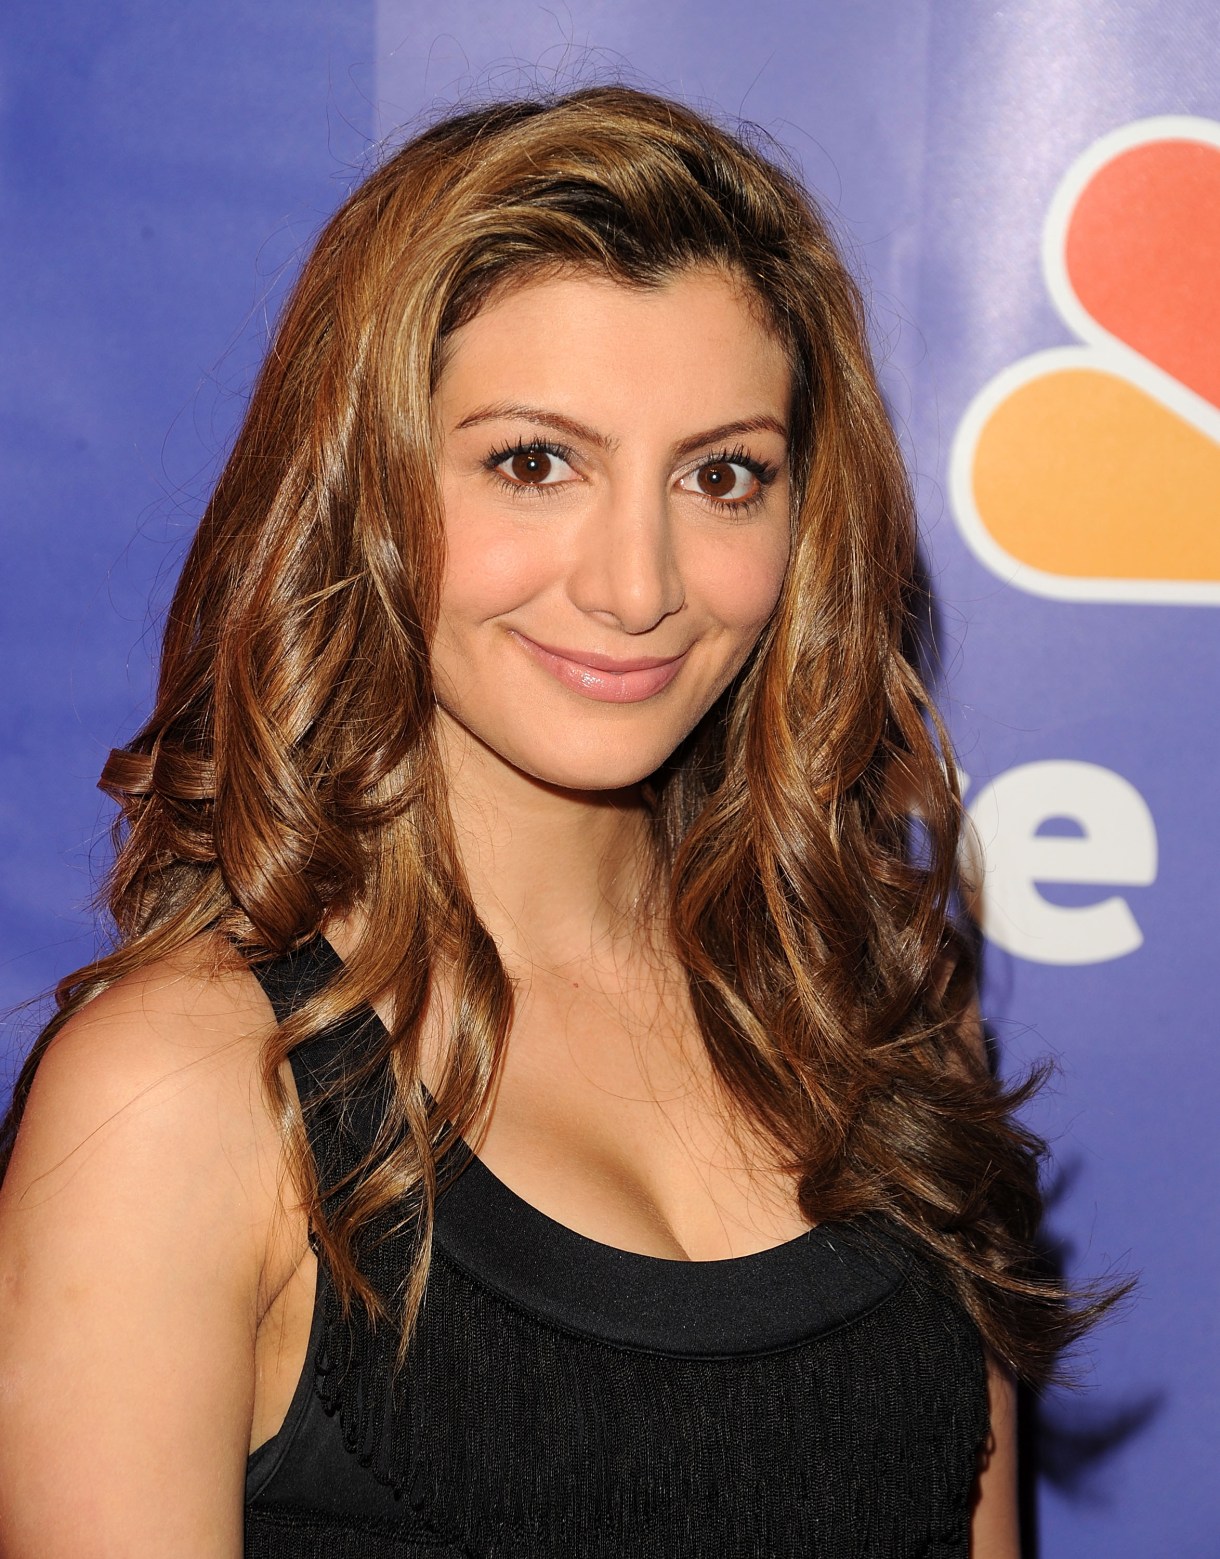 NEW YORK - MAY 17:  Actress Nasim Pedrad attends the 2010 NBC Upfront presentation at The Hilton Hotel on May 17, 2010 in New York City.  